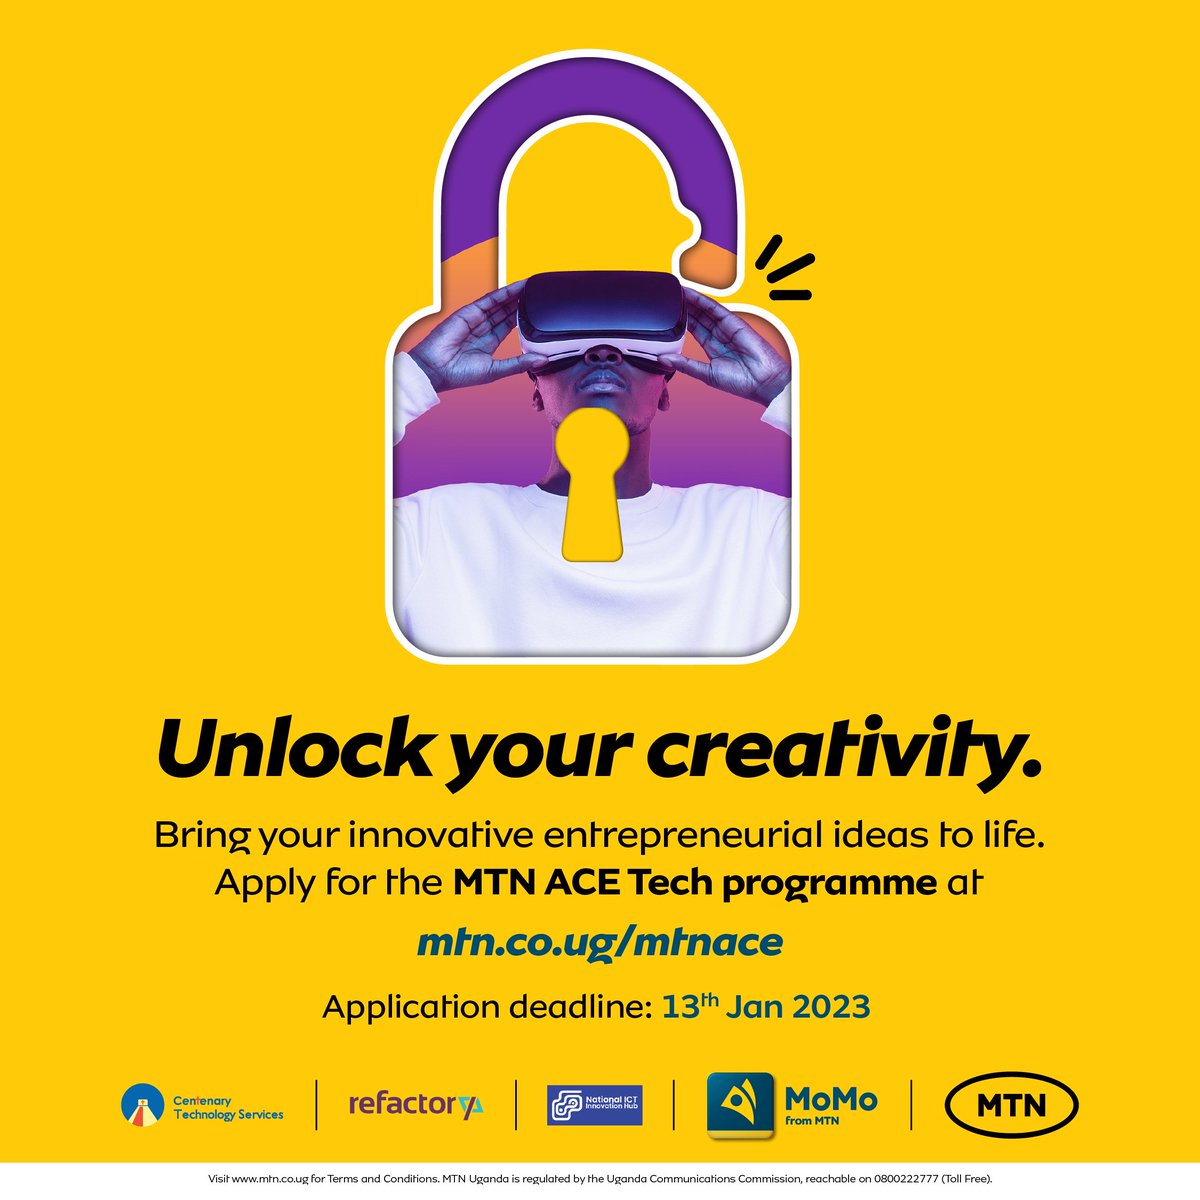 DEADLINE is today: 13th Jan 2023 

Don't miss out on what will be your 2023 game-changer. 

Apply for the MTN ACE Tech Programme at mtn.co.ug/impact/mtn-ace/

#MTNAce #DoingGoodTogether